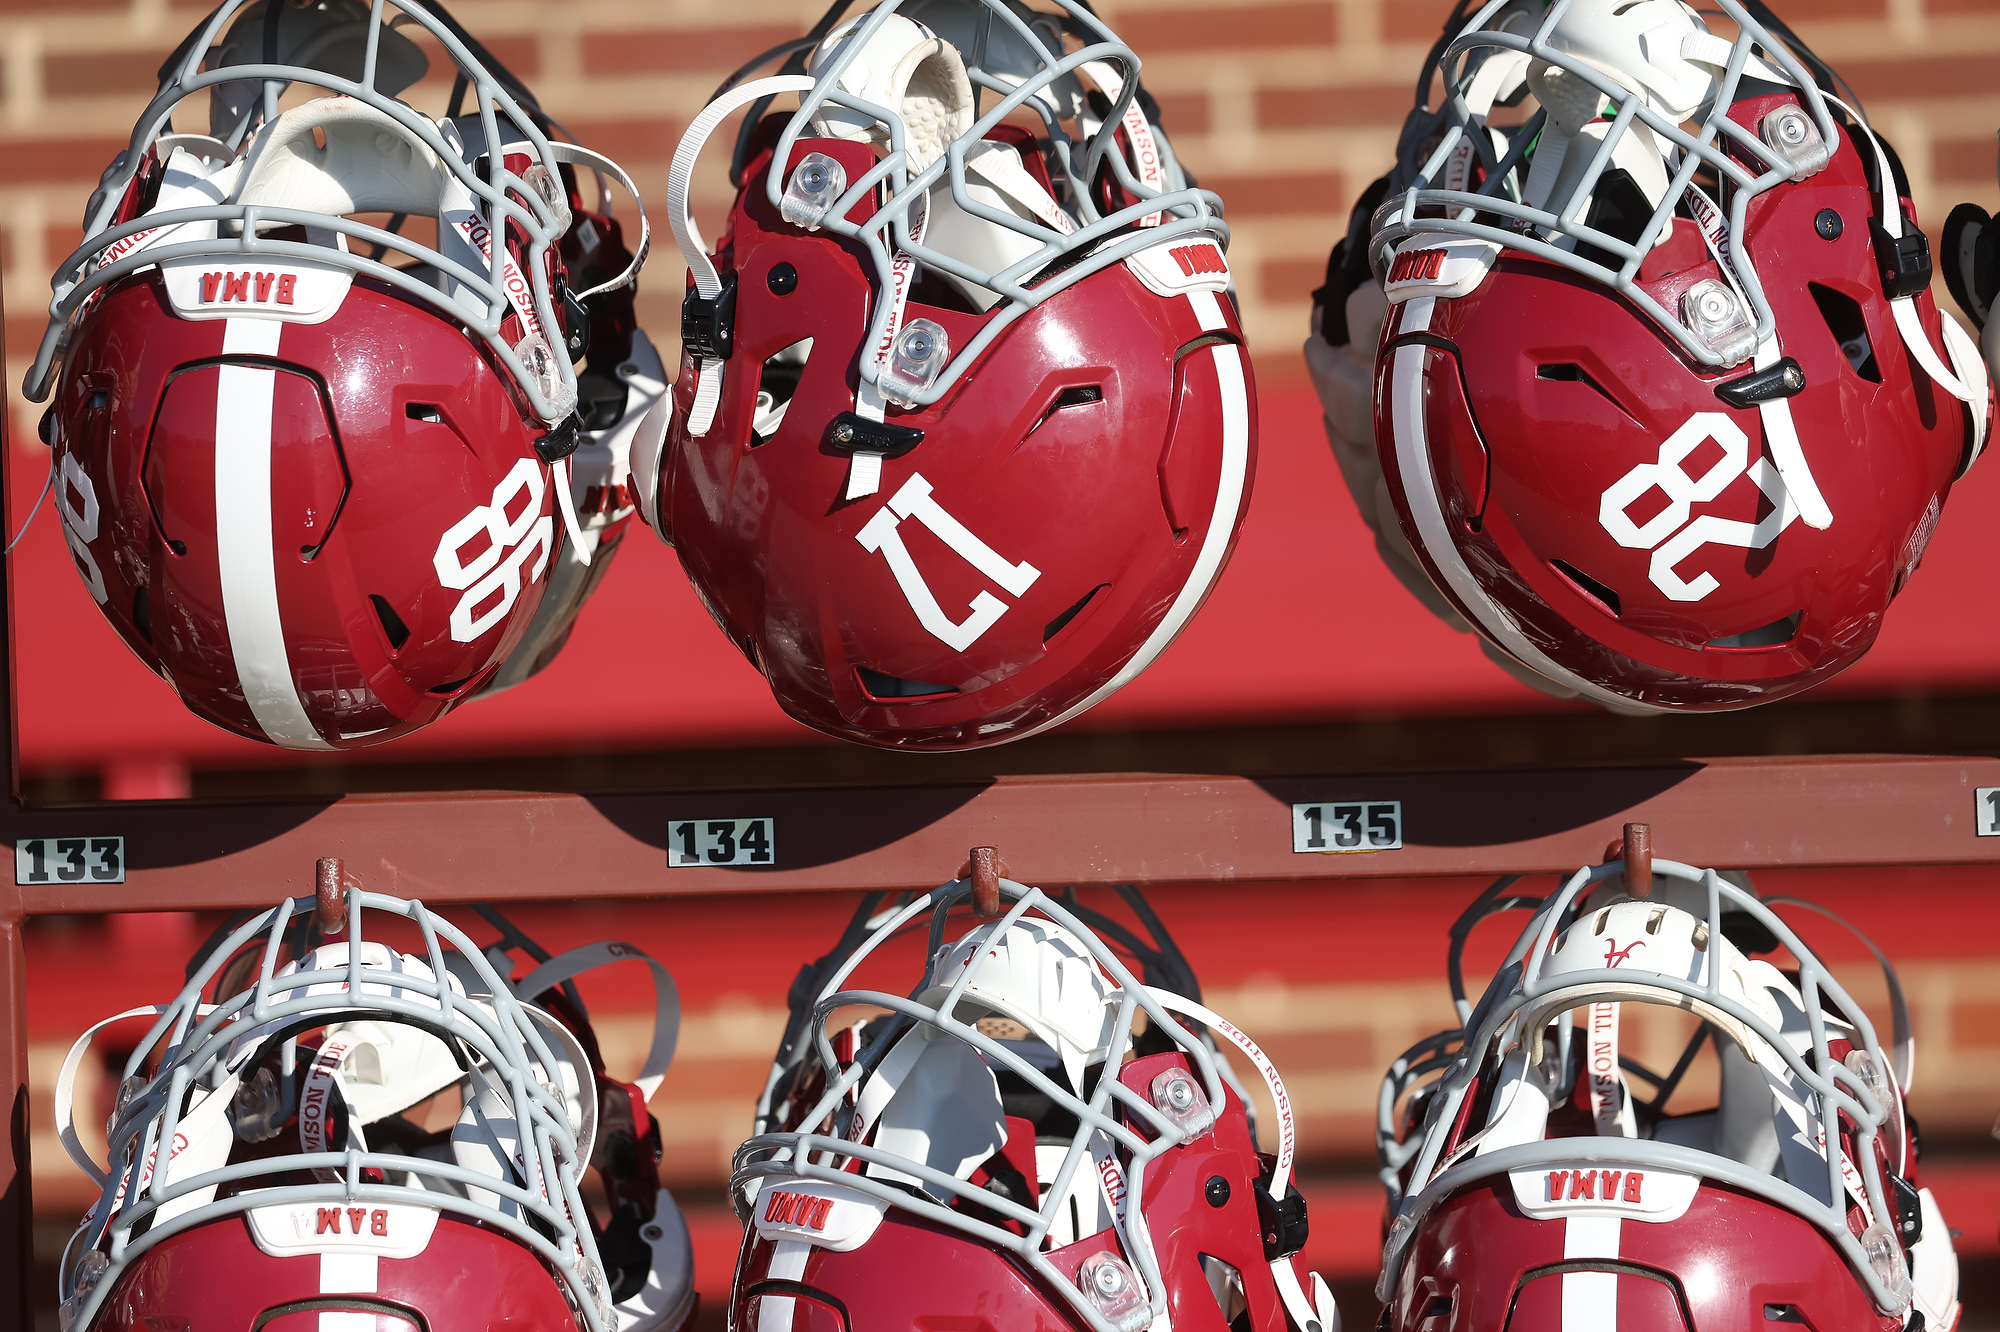 Helmets lined up during practice at Thomas-Drew Practice Fields in Tuscaloosa, AL on Monday, Oct 17, 2022.